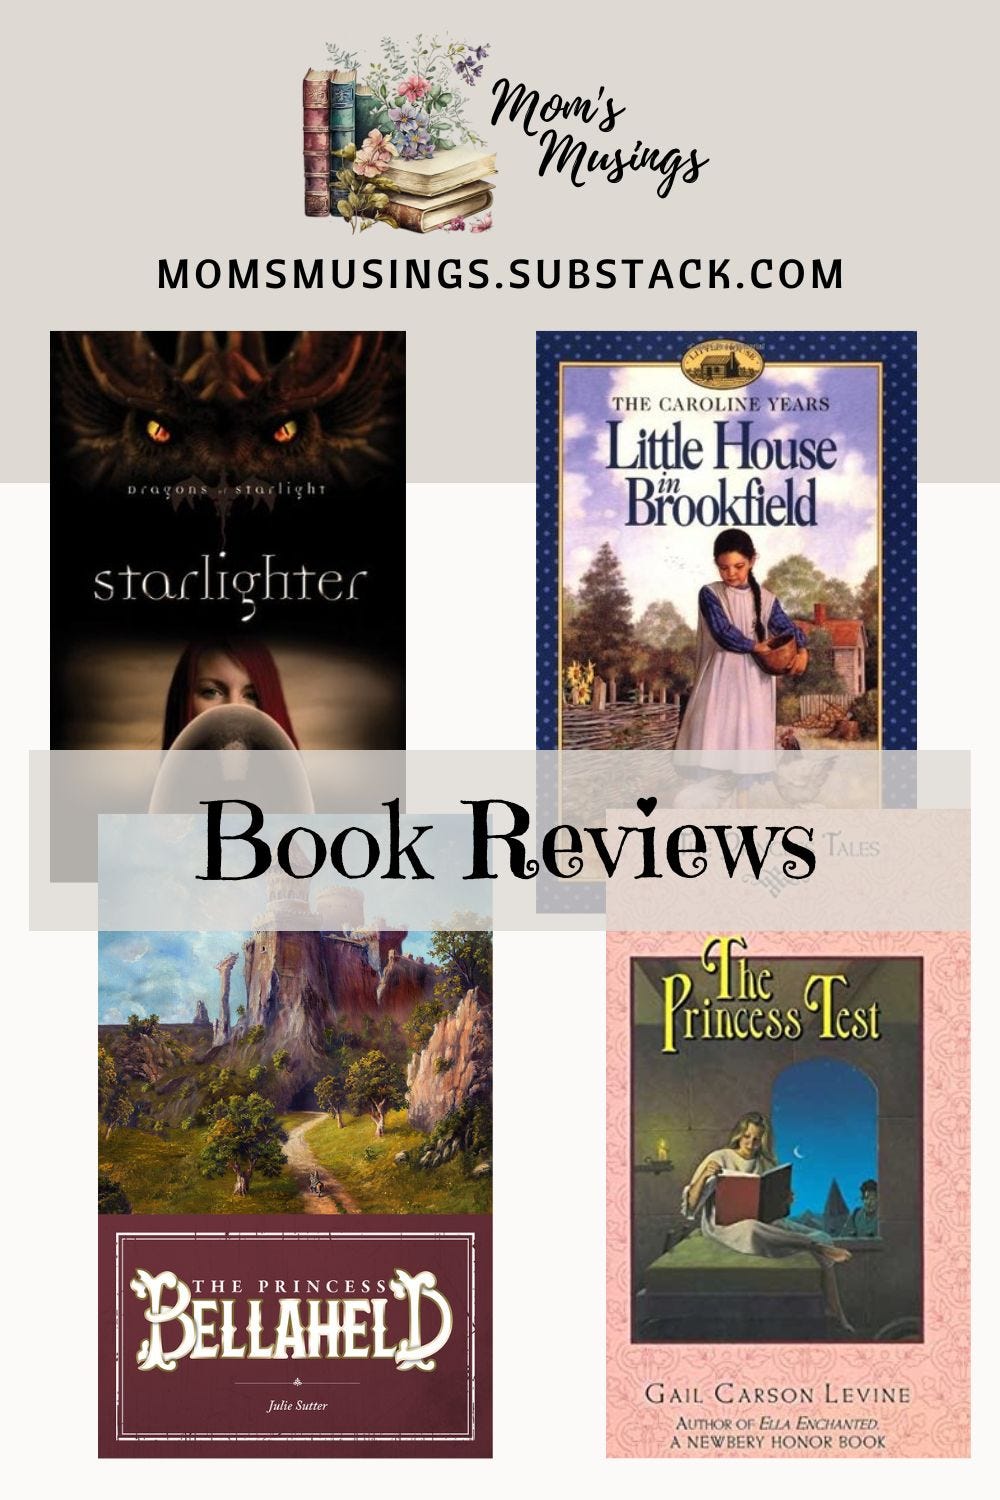 pinnable covers of books reviewed: starlighter, little house in brookfield, princess bellaheld, the princess test